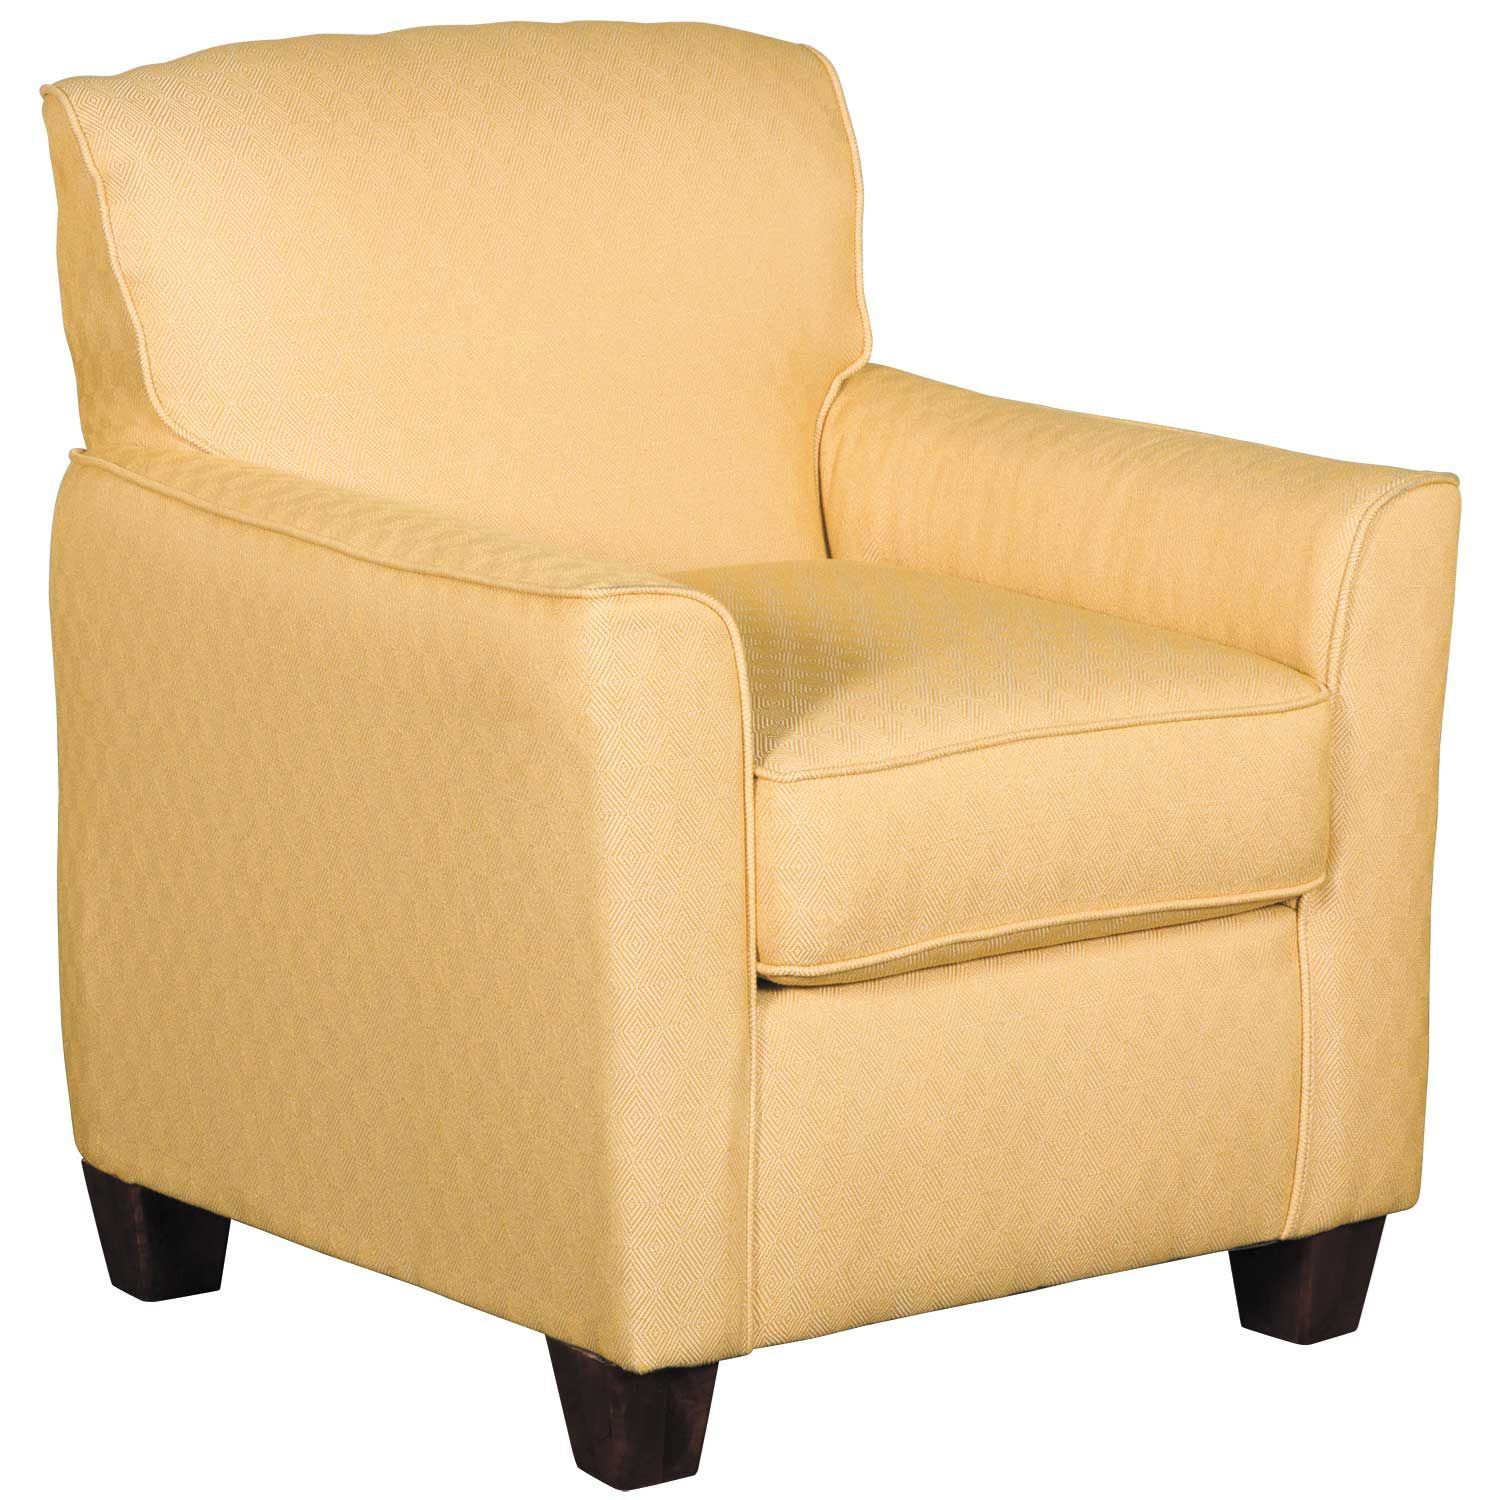 Gold Accent Chair : Antique Leather Accent Chair With Gold Accent